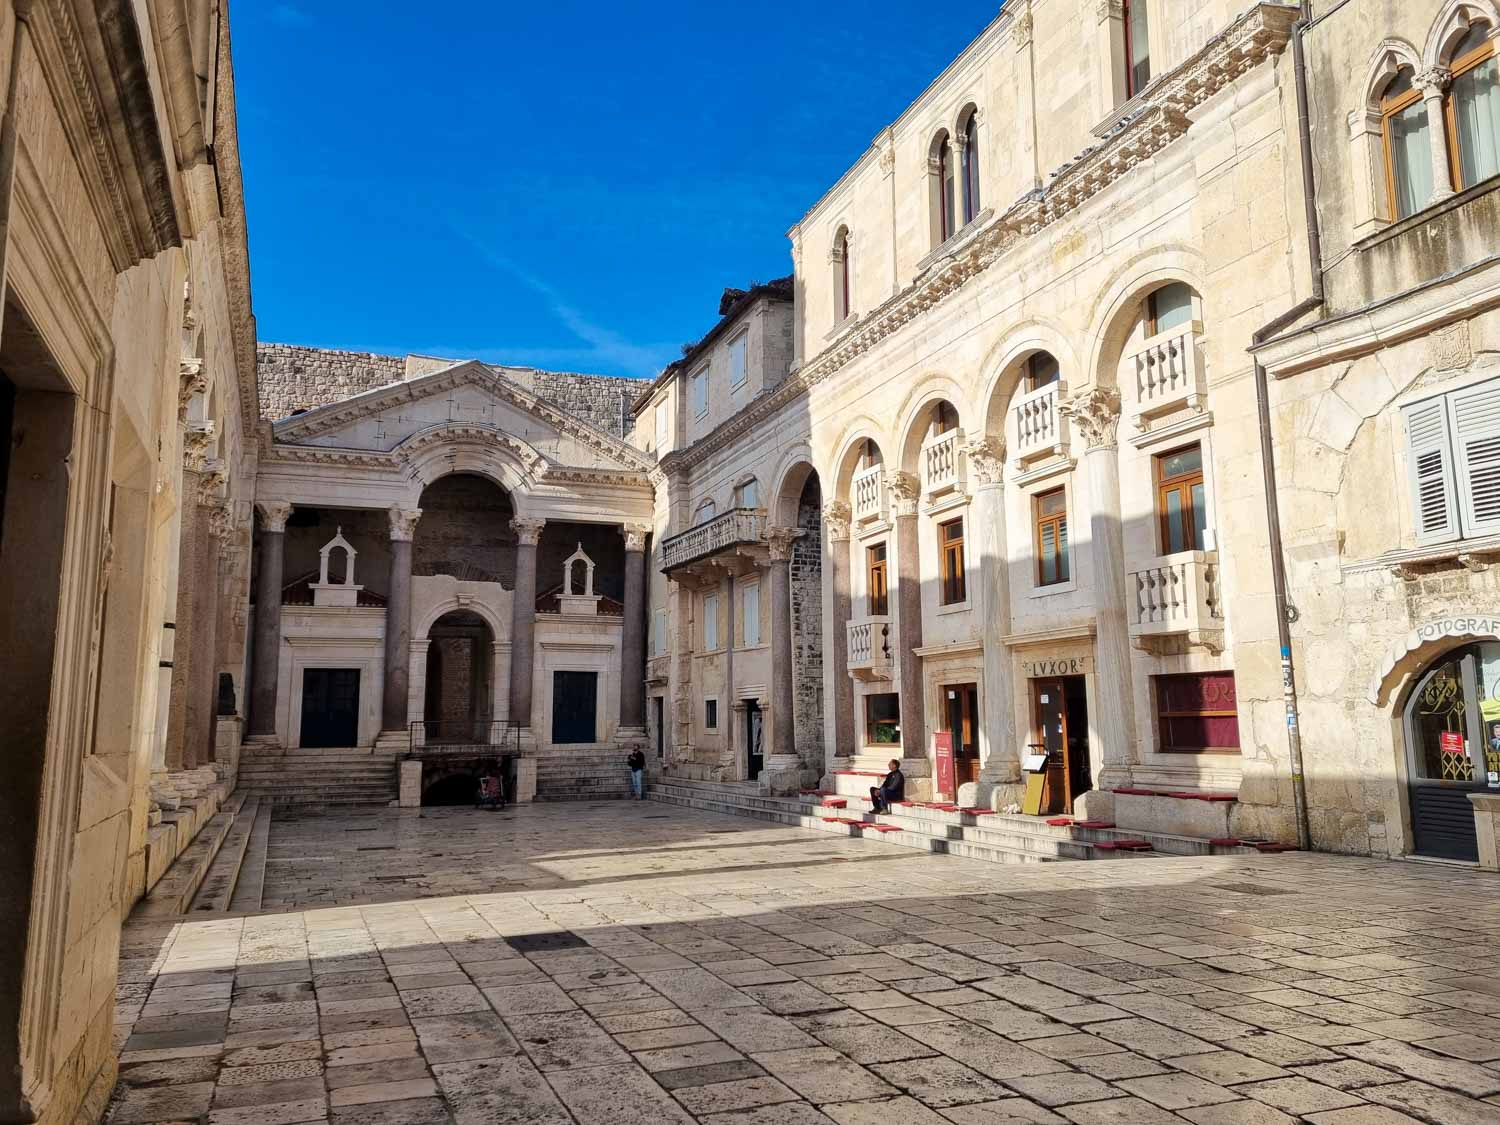 View of the Peristil, or Peristyle Square, at the heart of Diocletian's Palace in Split - taken early in the morning without the crowds, most of the city's key Roman buildings are around her